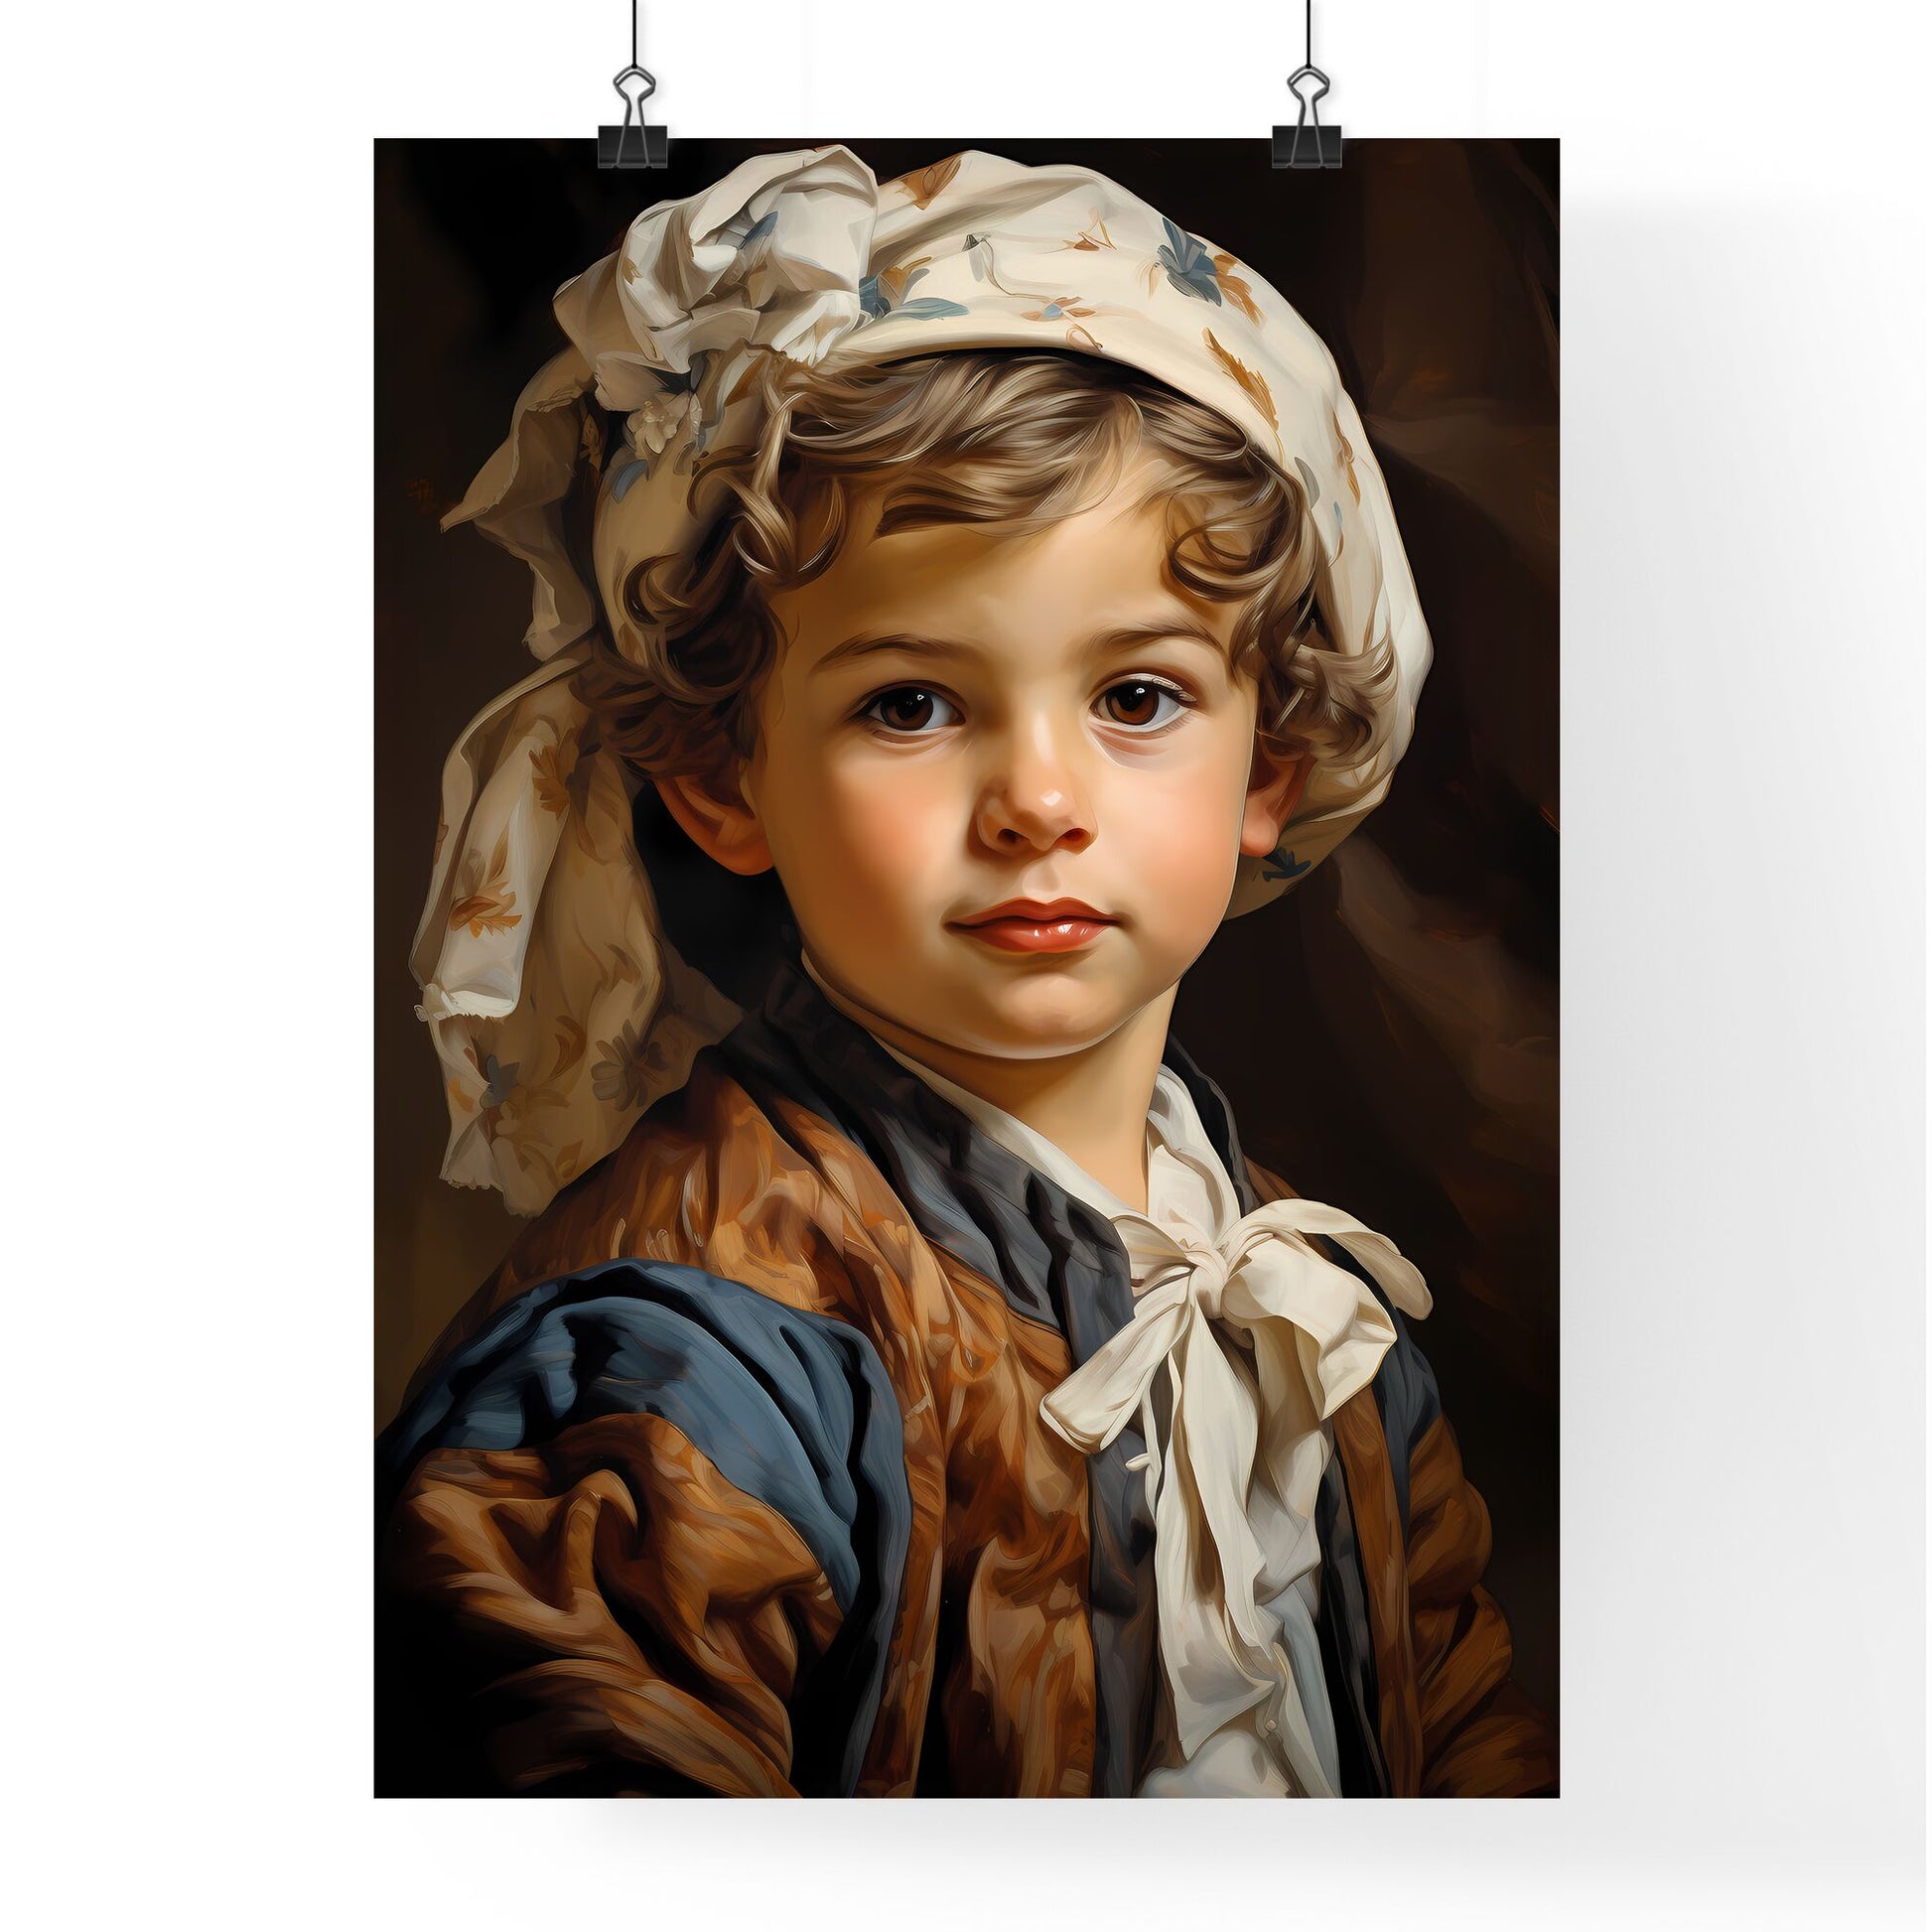 Baby Boy Posing For His First Portrait - A Child Wearing A White Hat Default Title